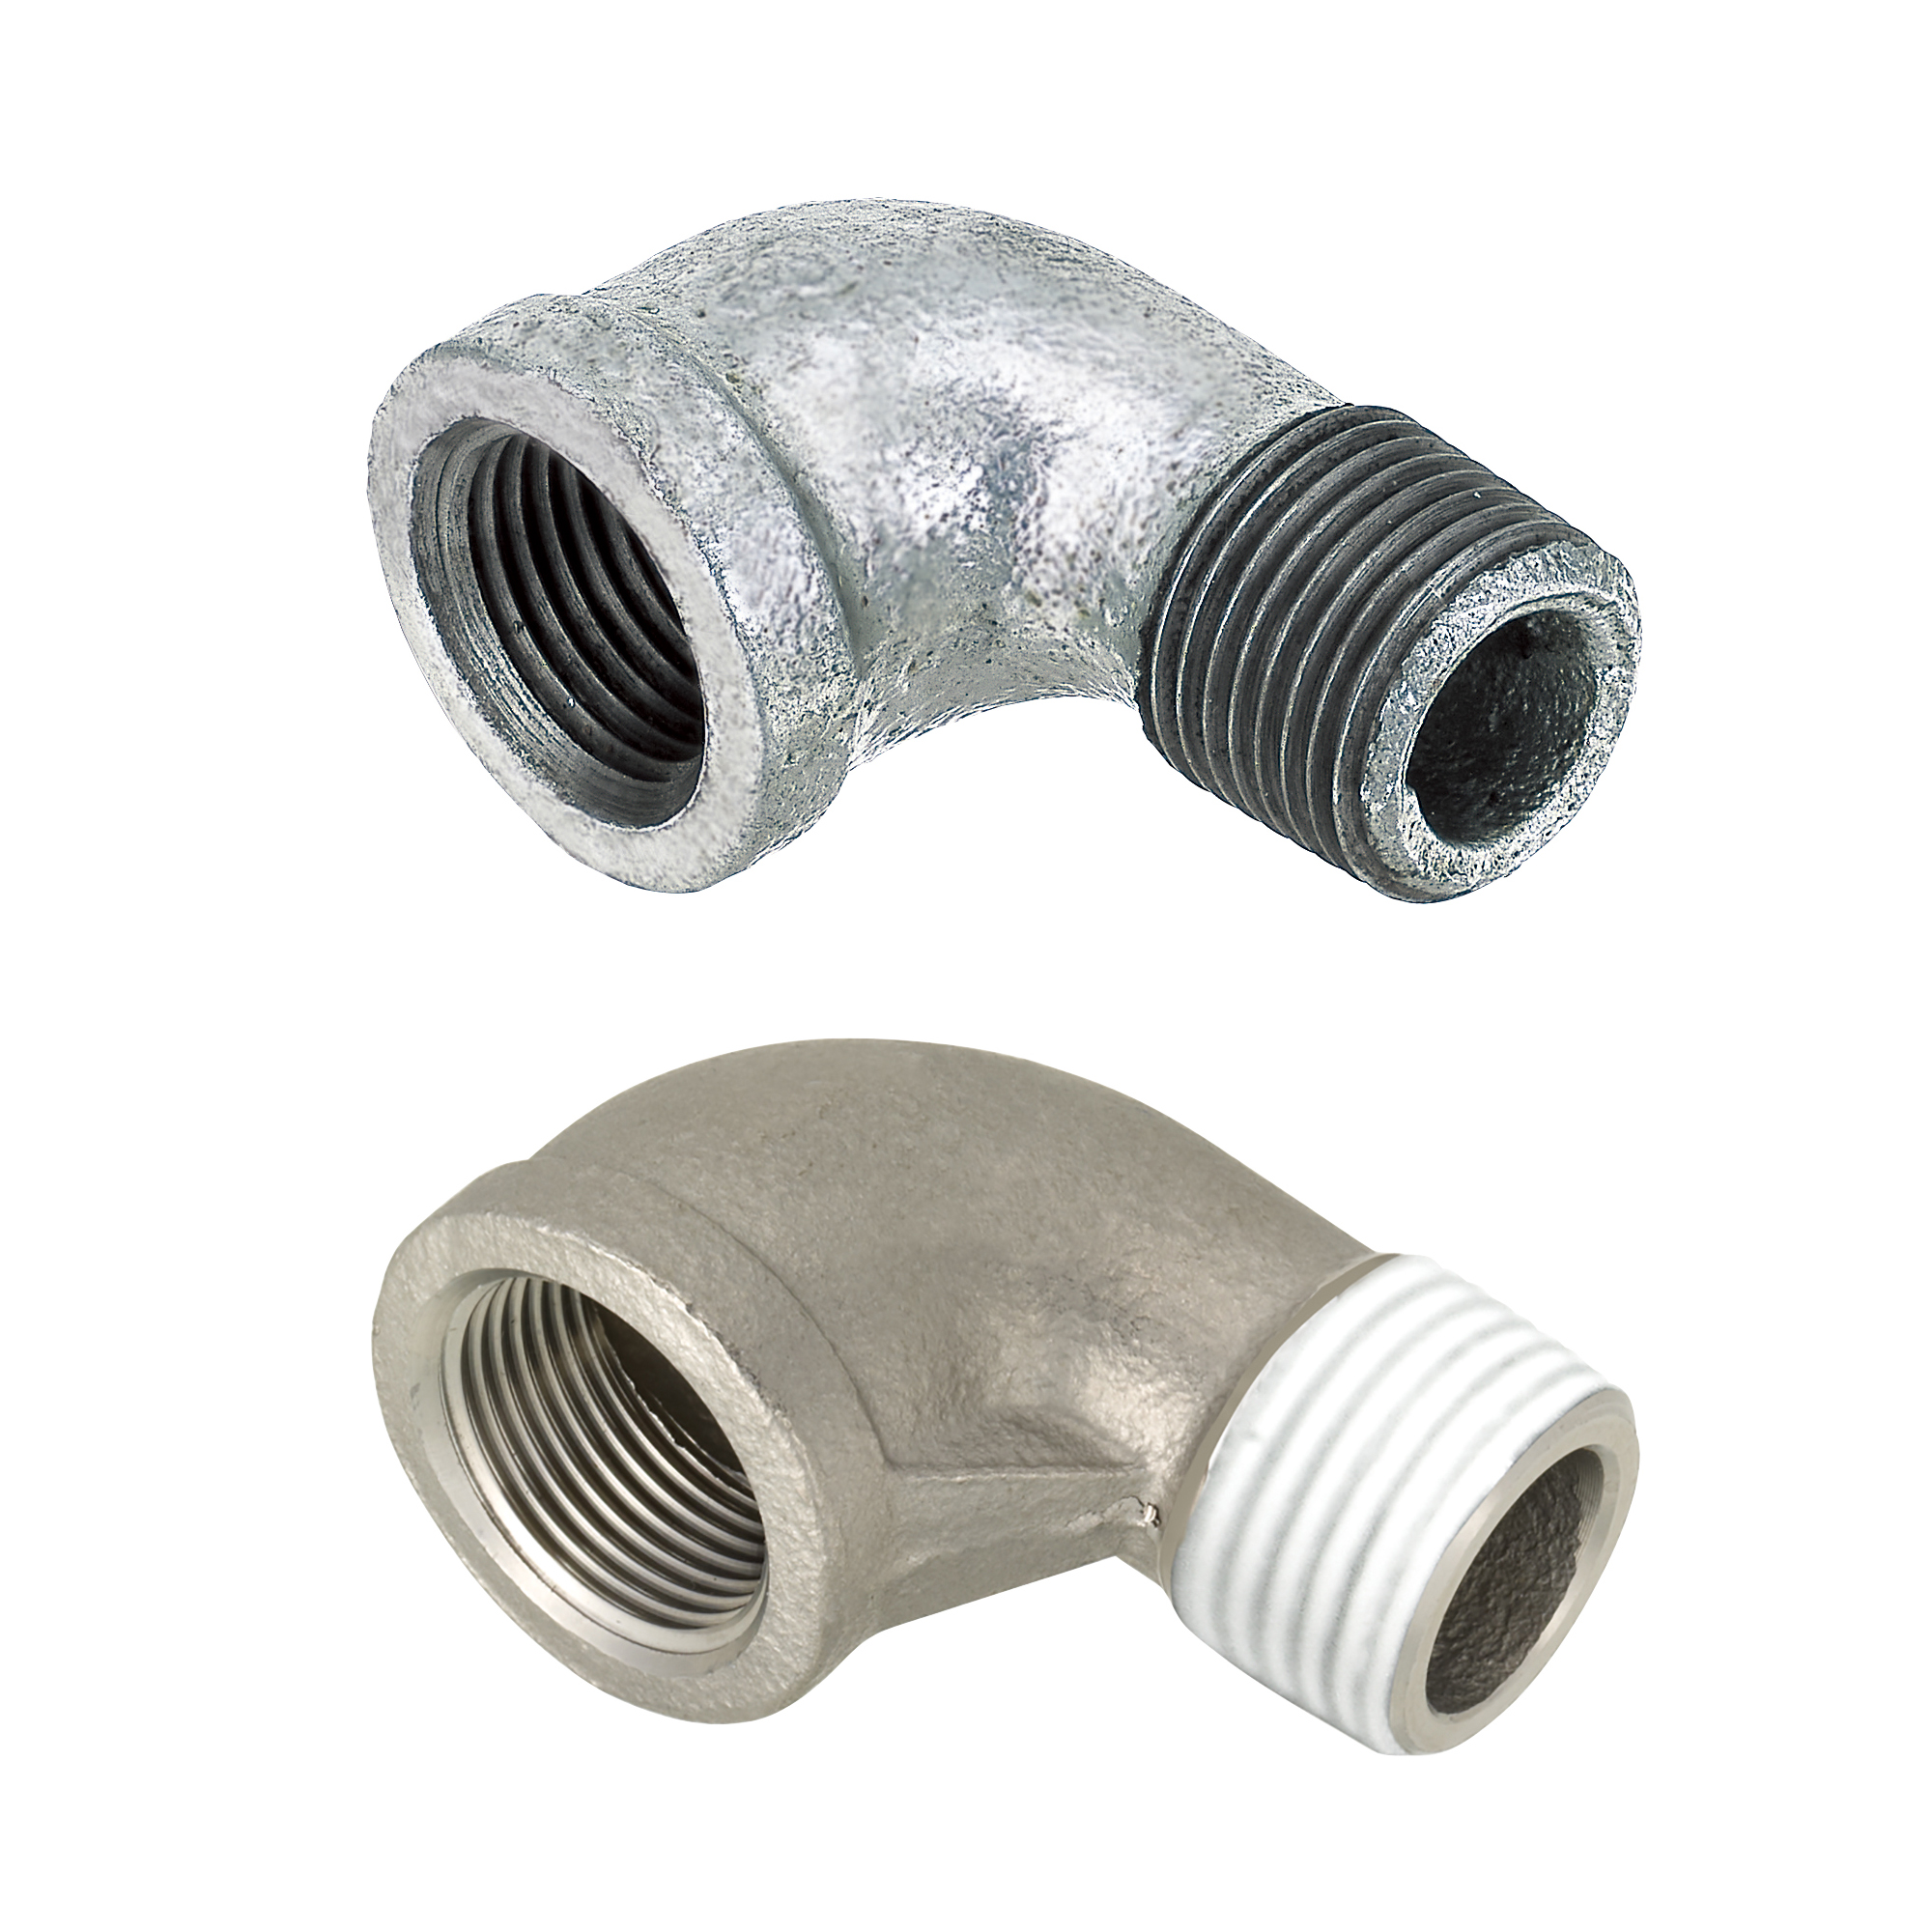 Pipe Fitting - 90° Elbow Adapter, Male to Female, Threaded and Tapped, Low Pressure SUTPEL25A